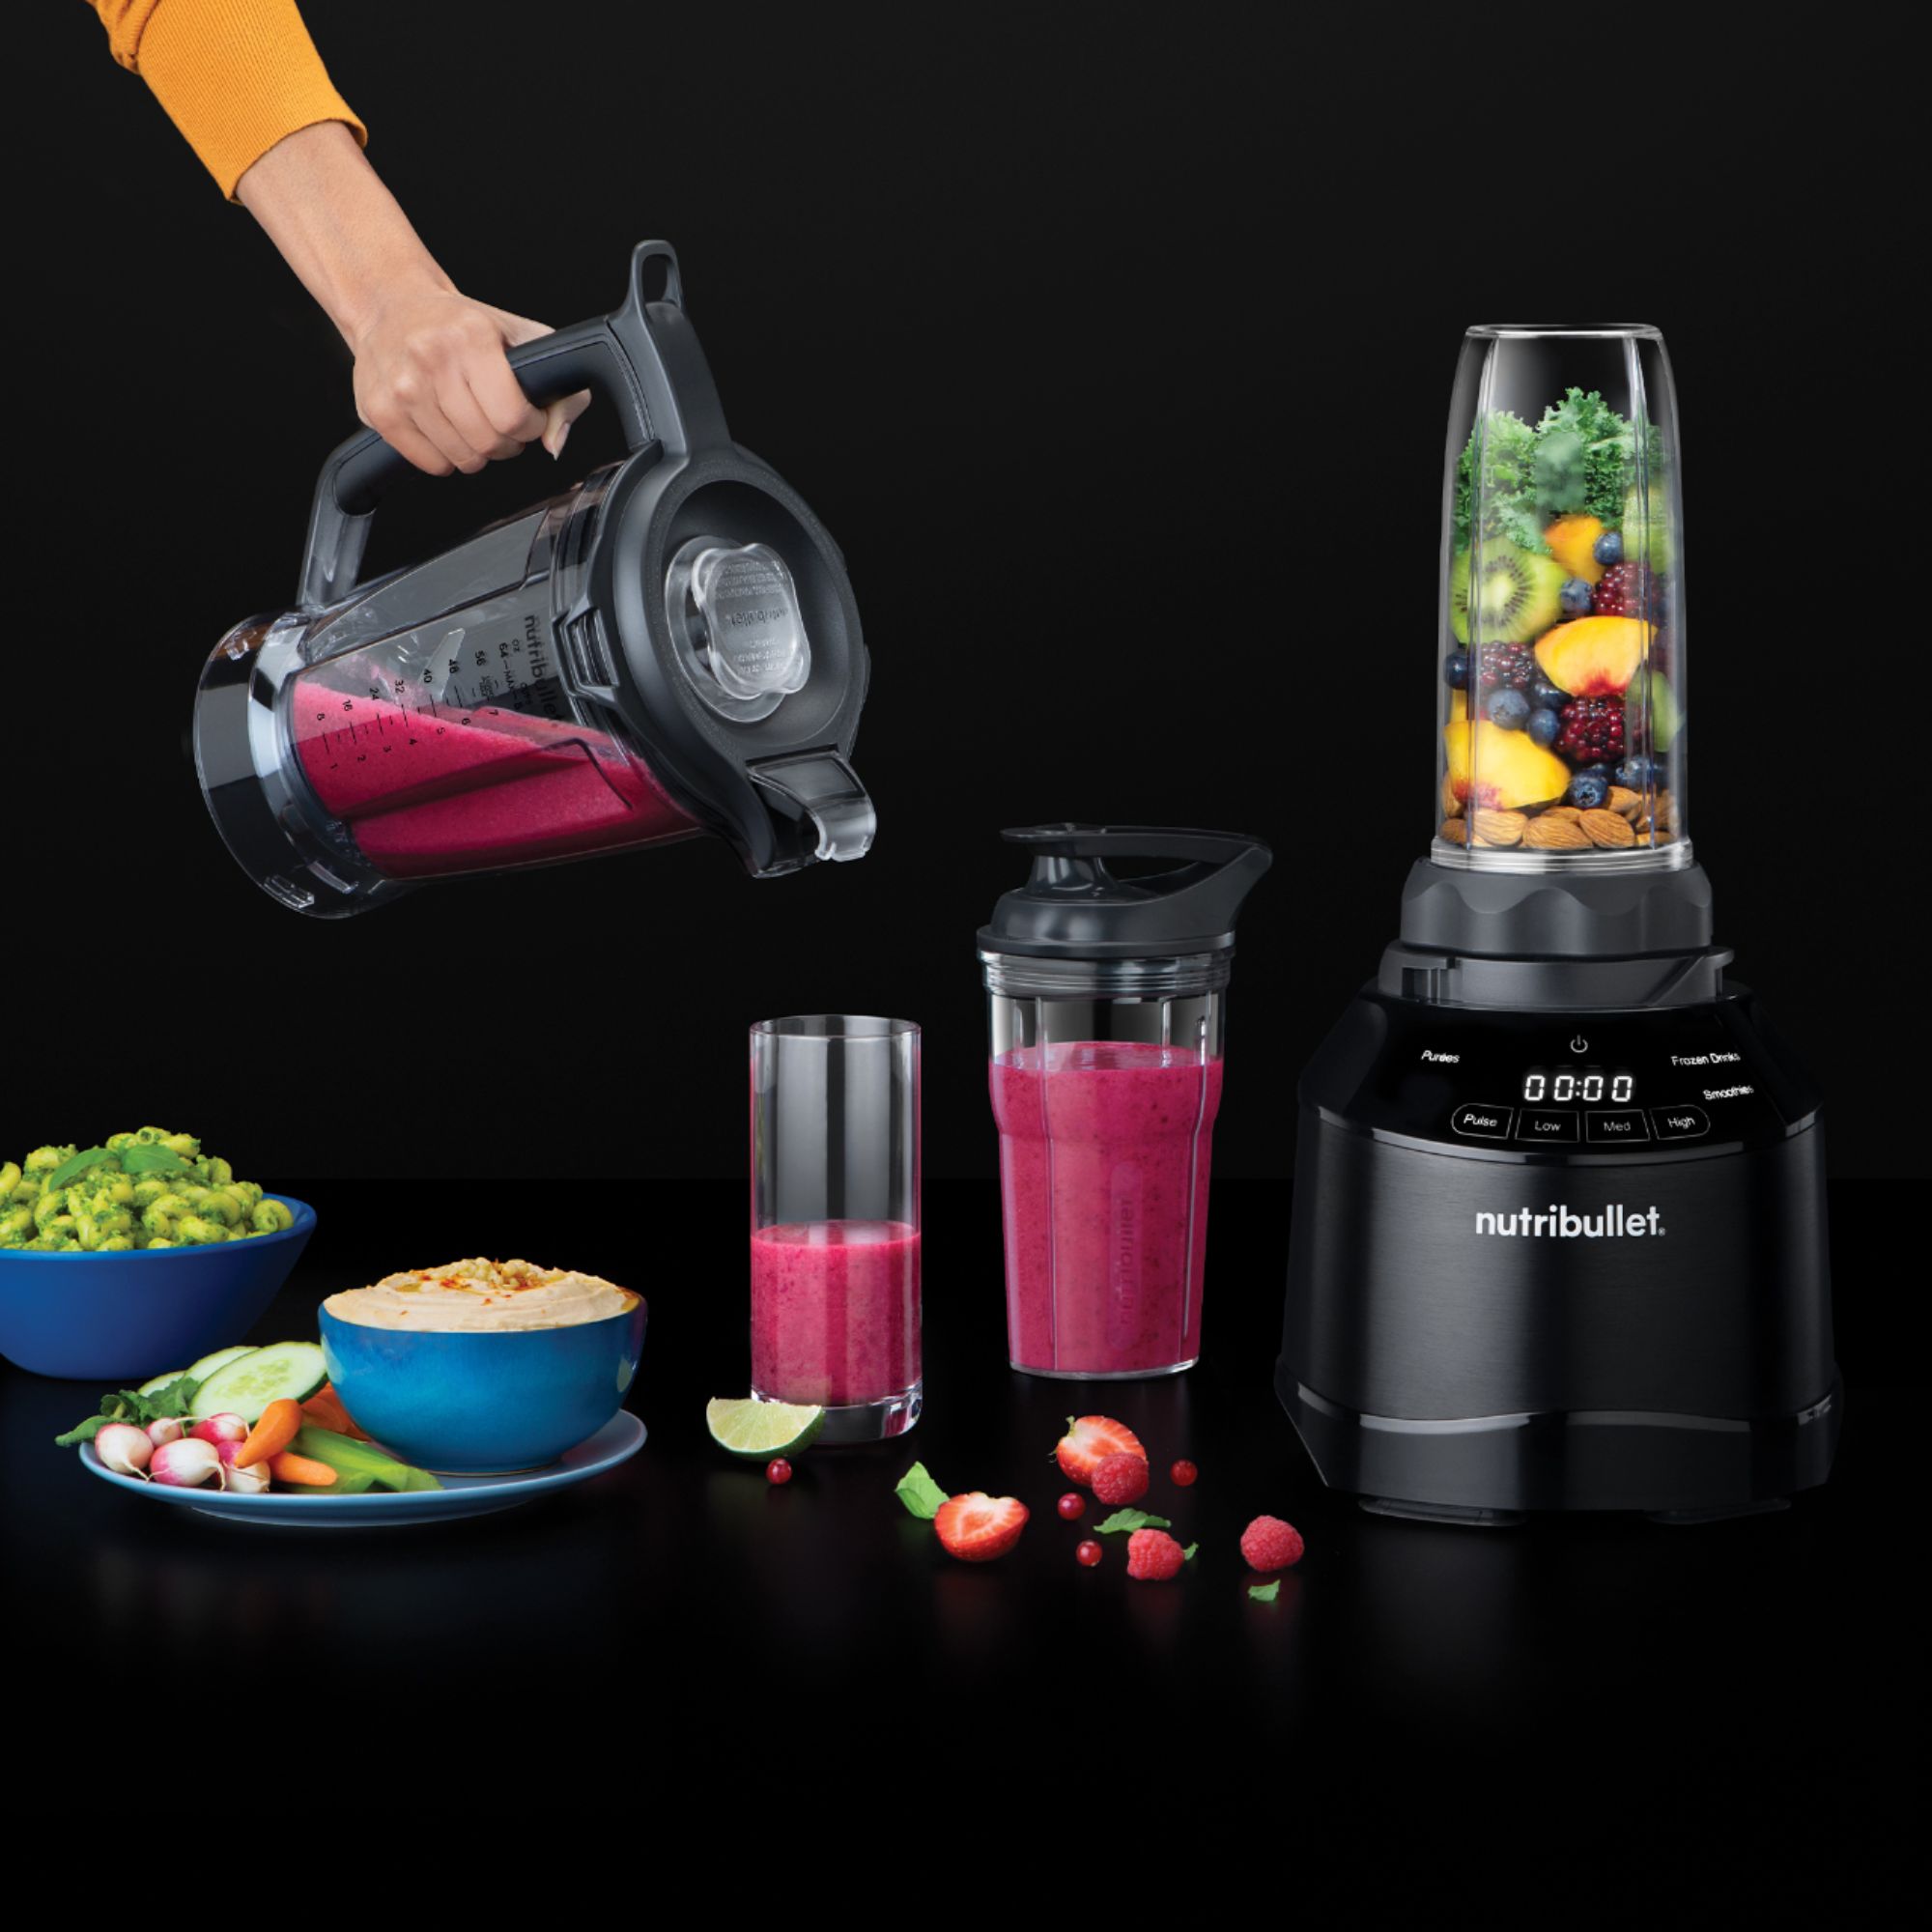 nutribullet - Get you a cooking companion that can do both. 👏 The